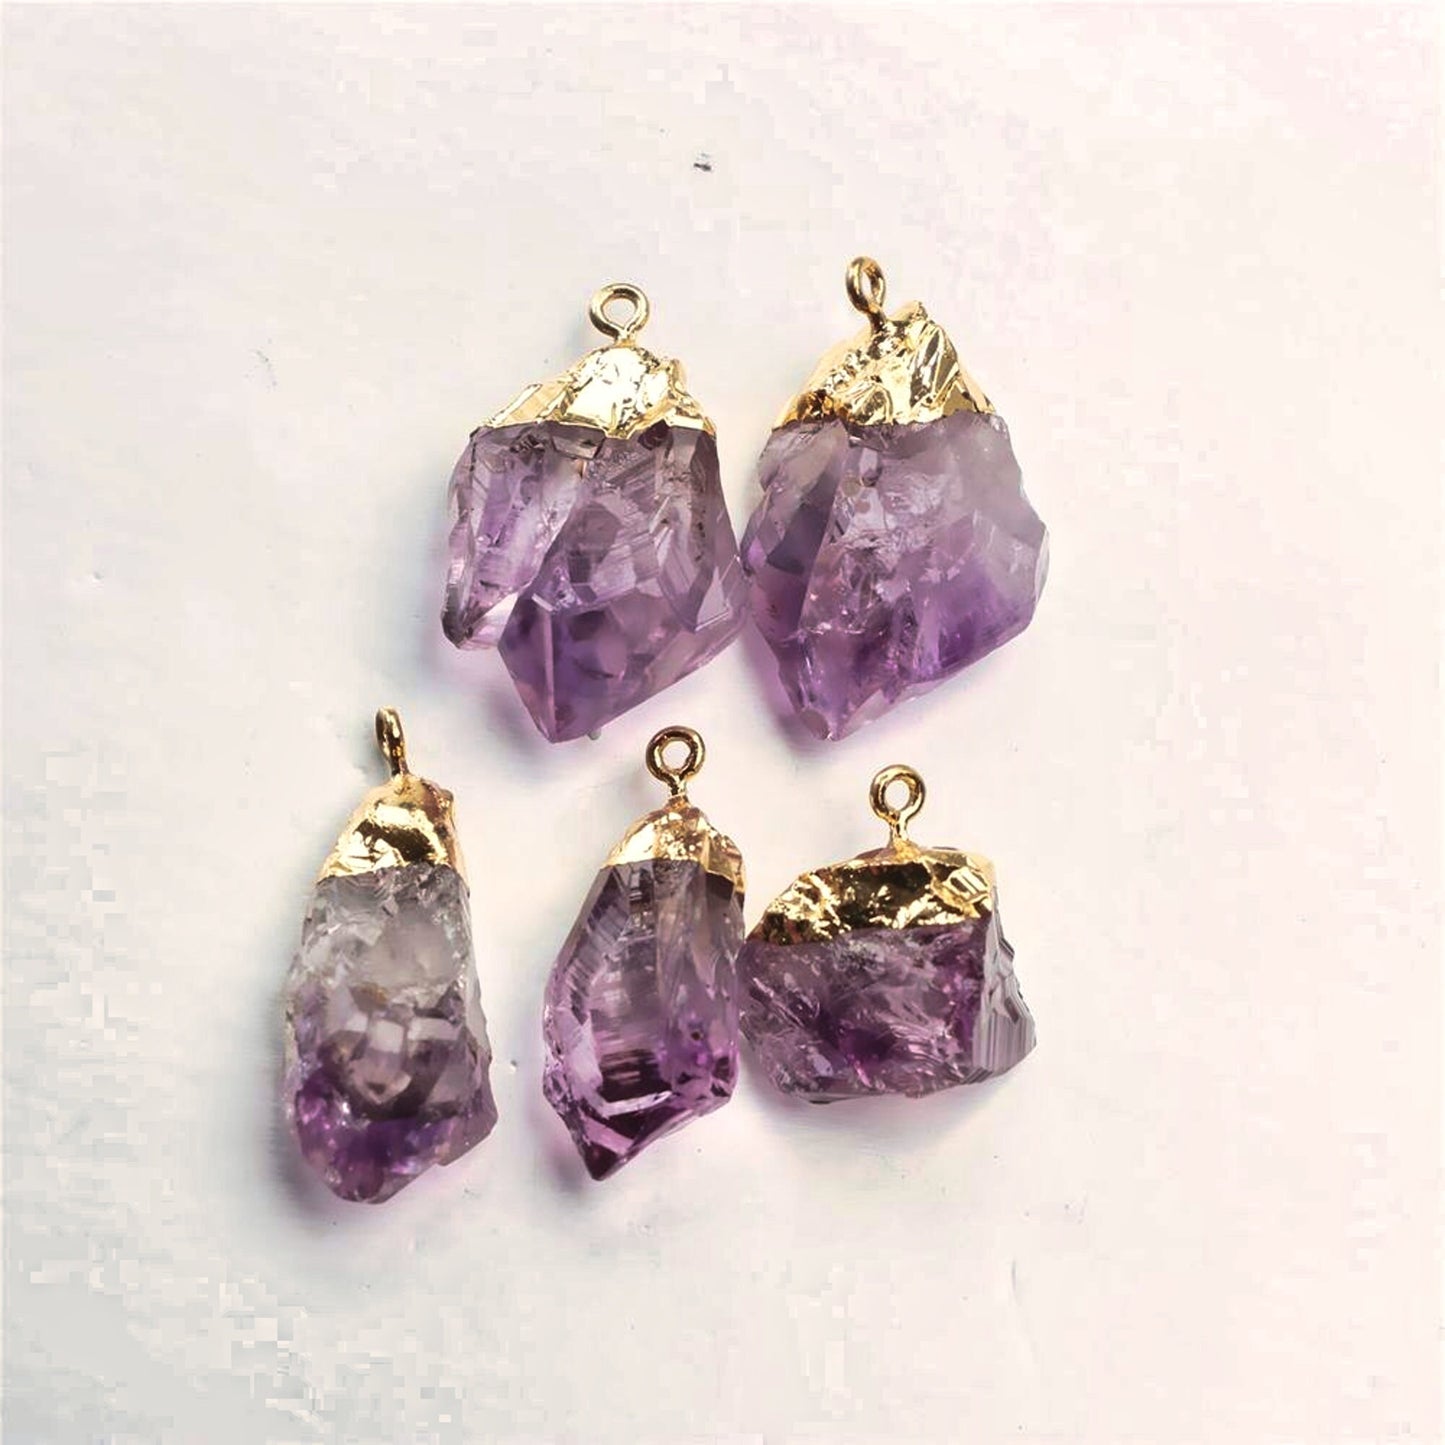 Natural Amethyst Gemstone Pendant with Long Chain - Healing Crystal Point Necklace and Home Decor in Purple